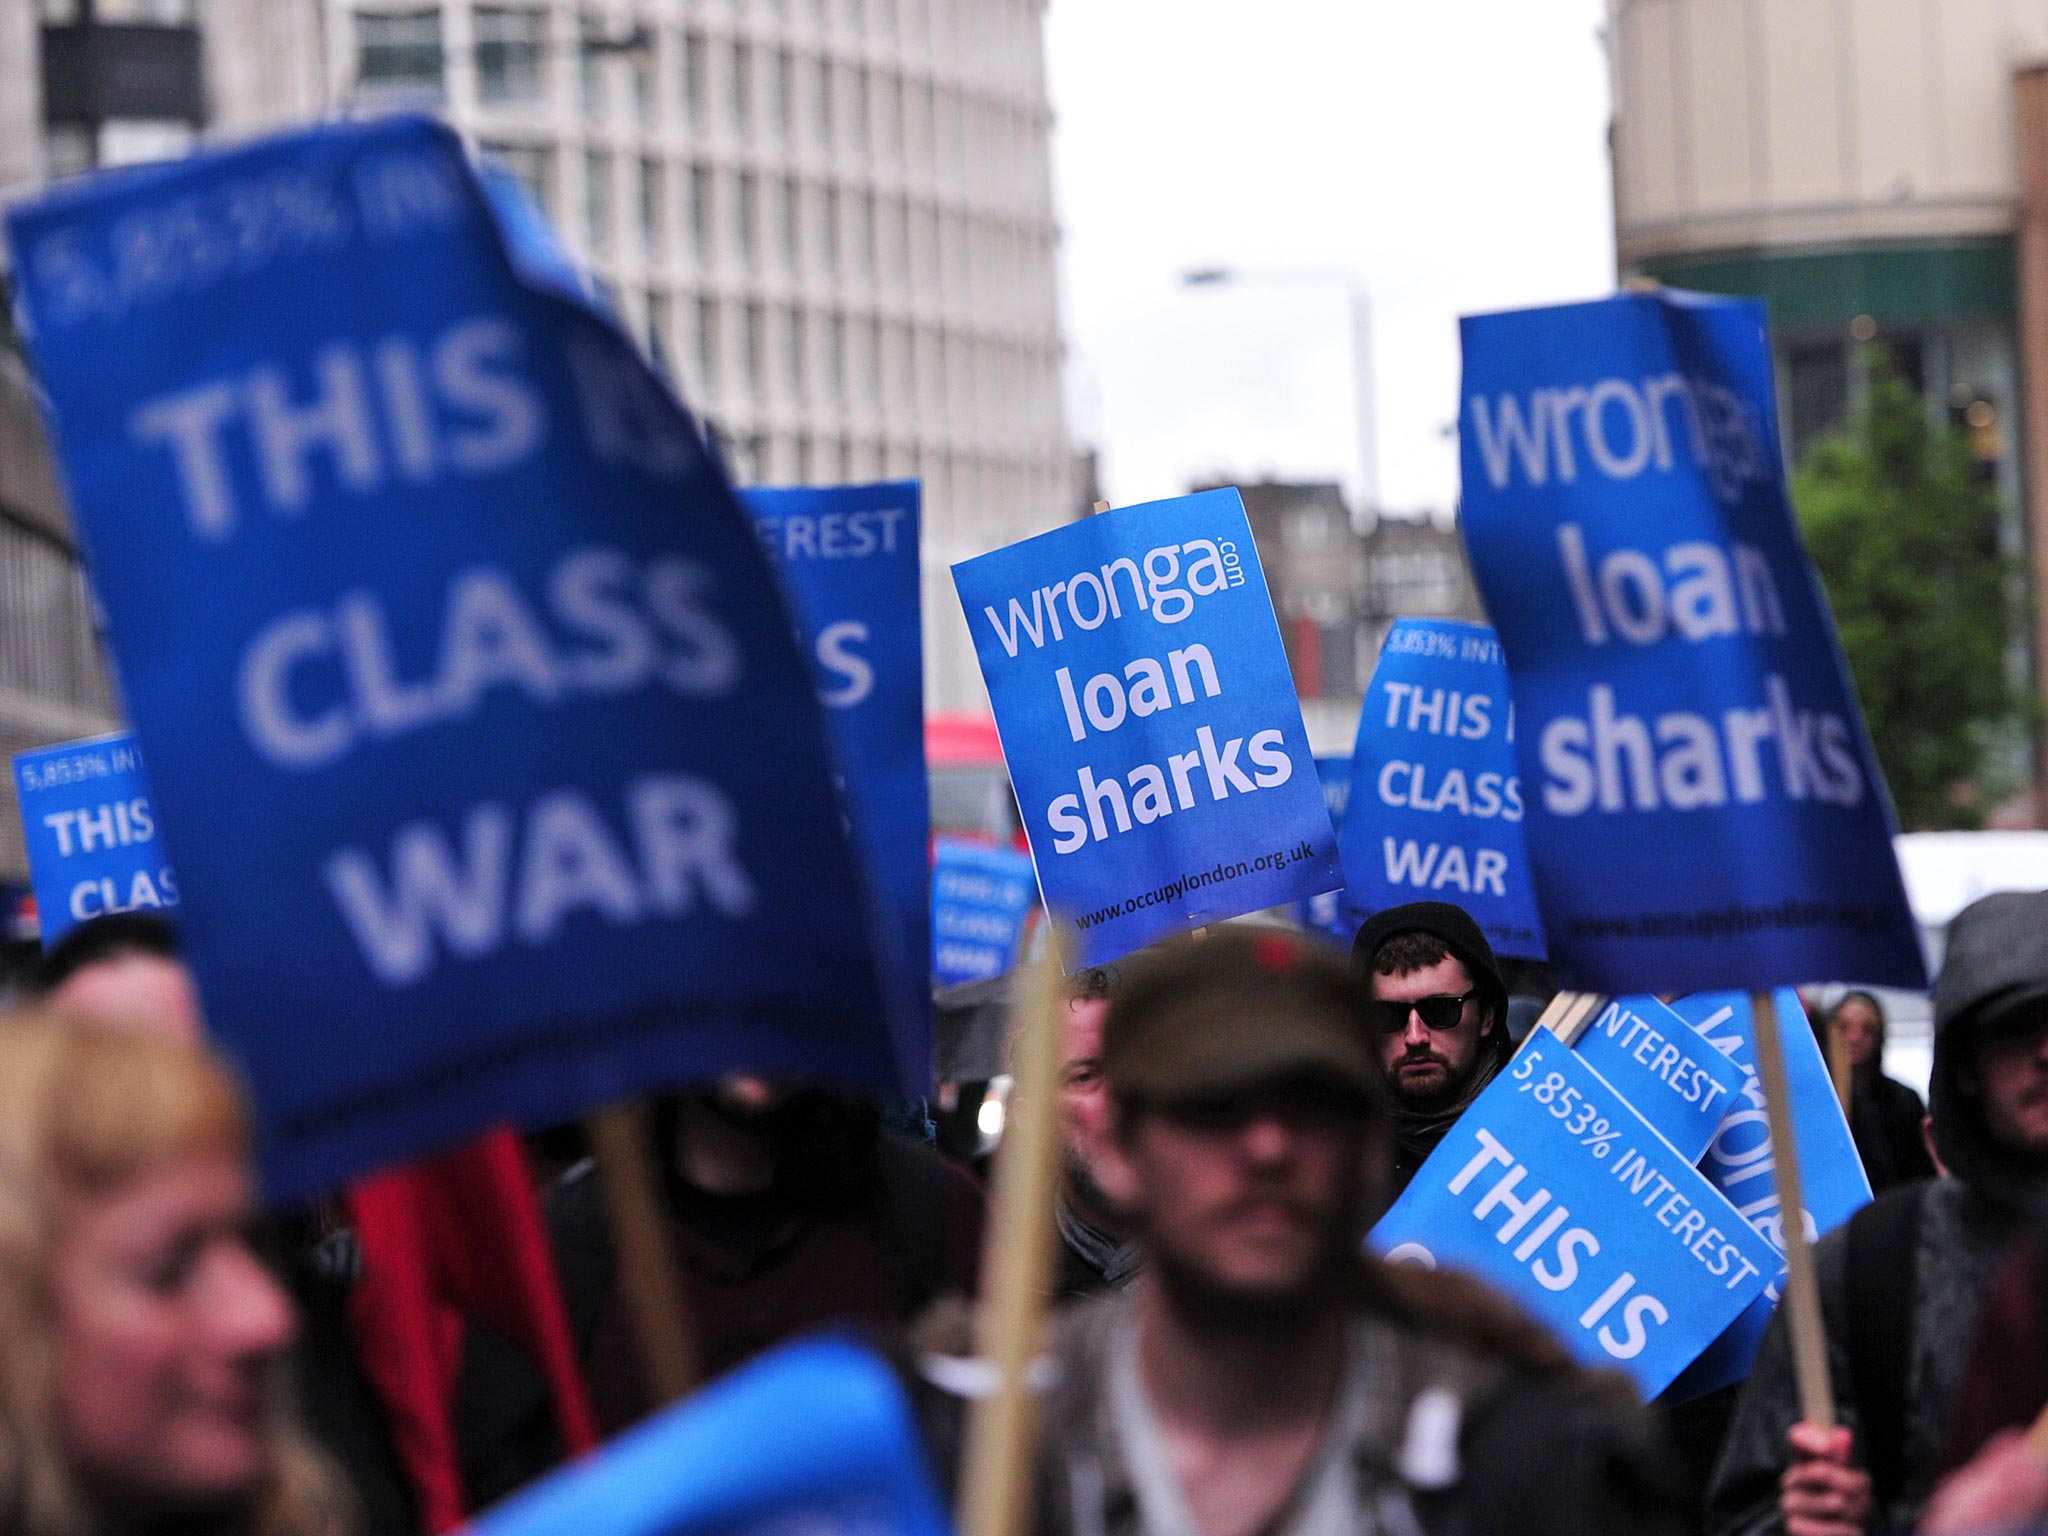 Protesters demonstrate against payday loan firms in
London in May